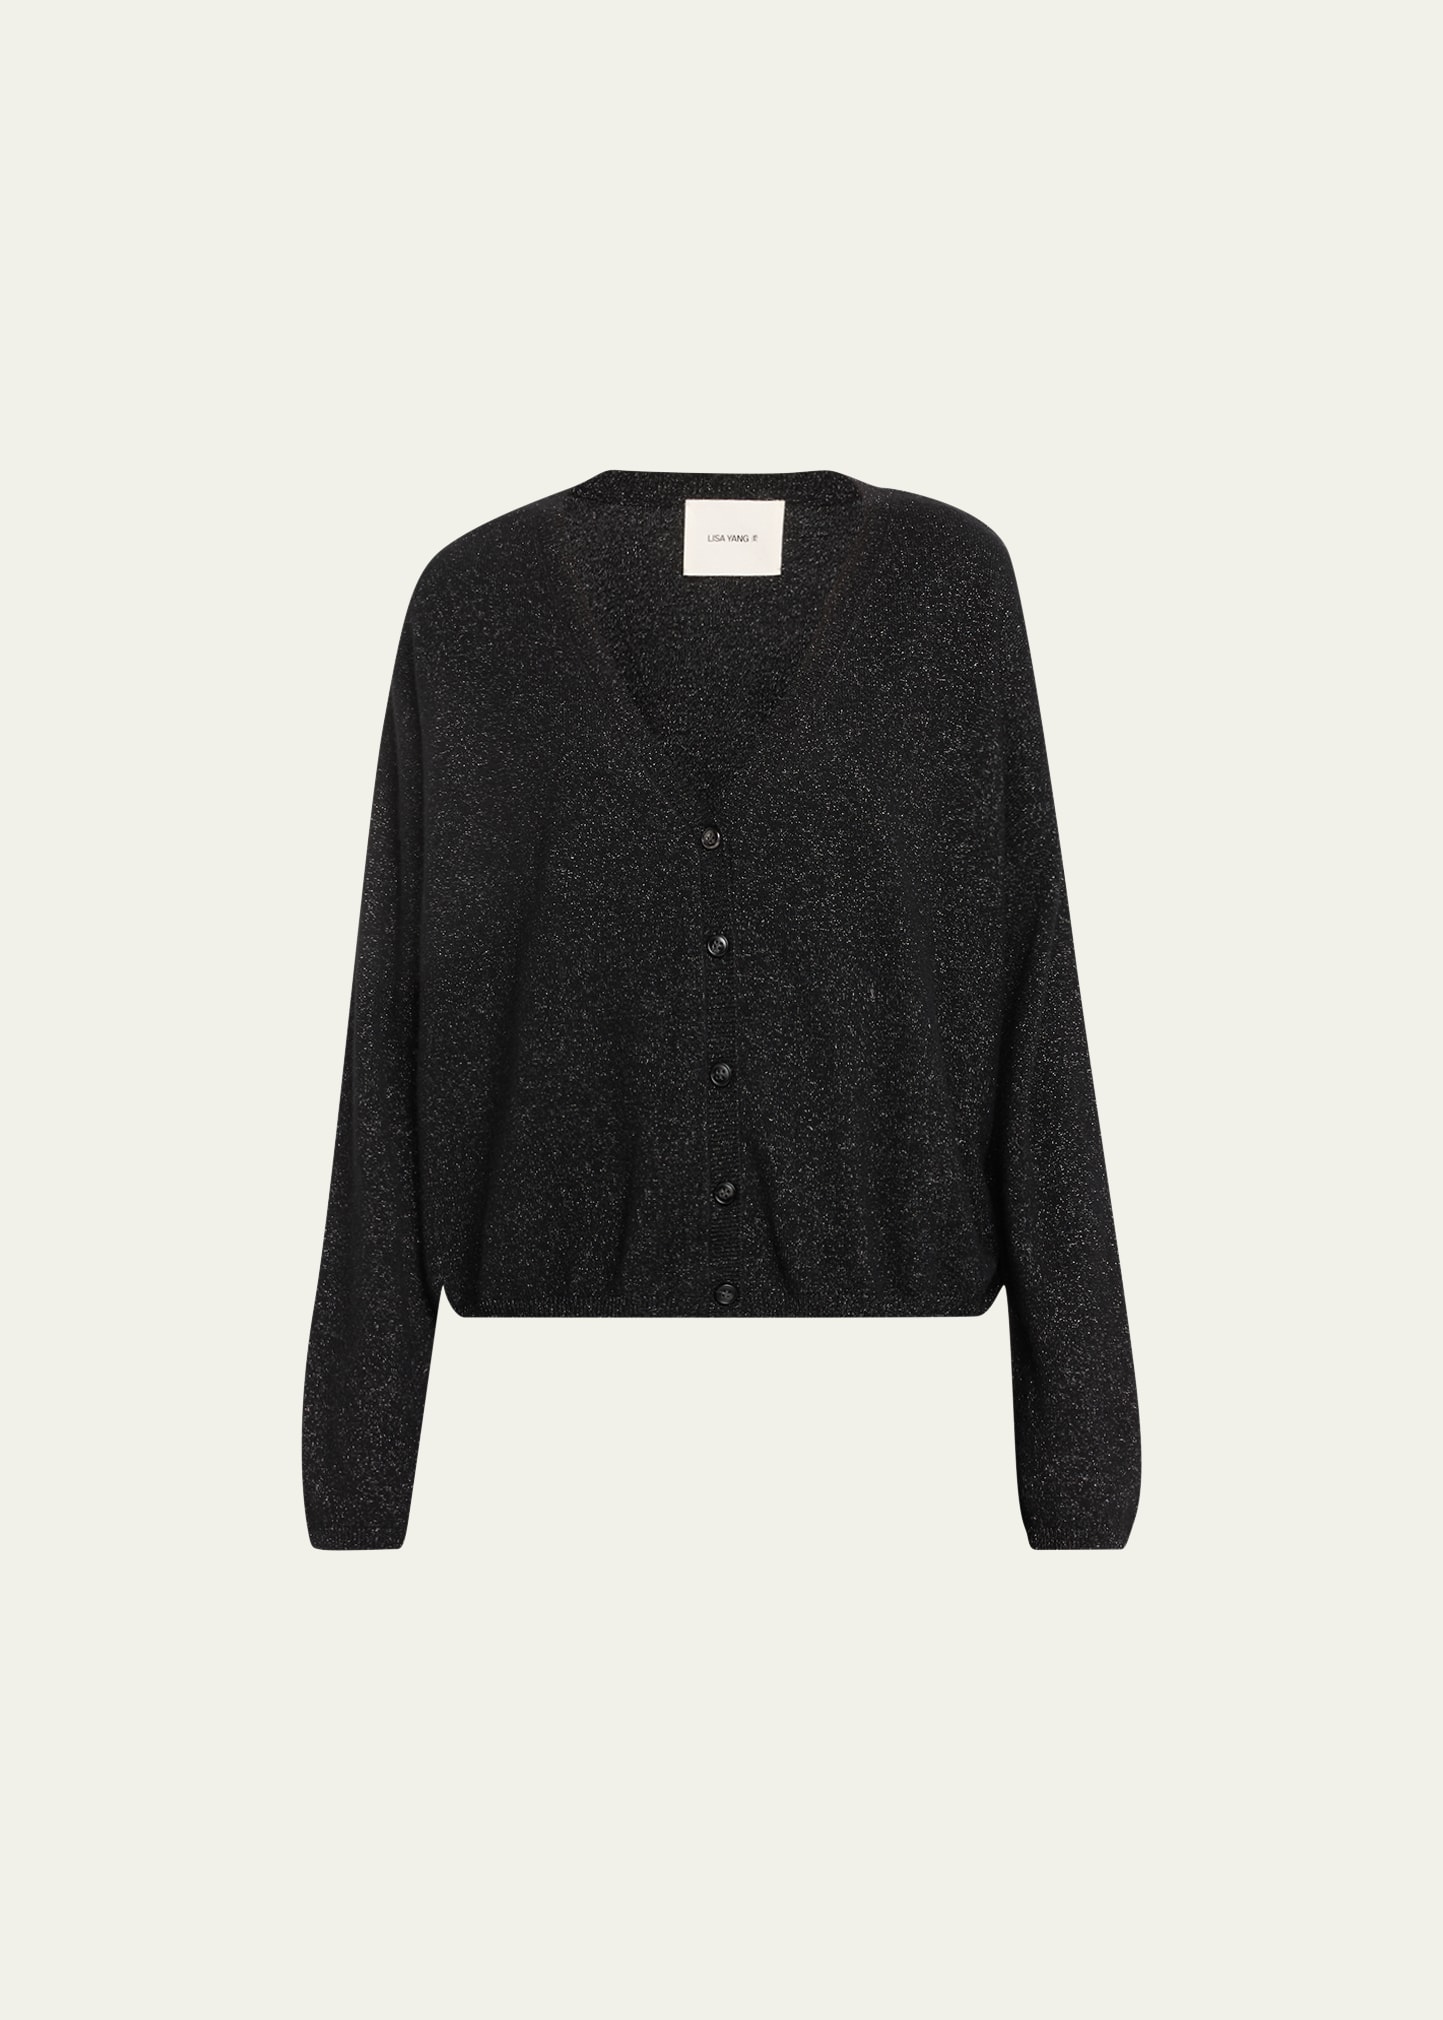 Lisa Yang The Abby Cashmere Sparkle Cardigan In Black Sparkle